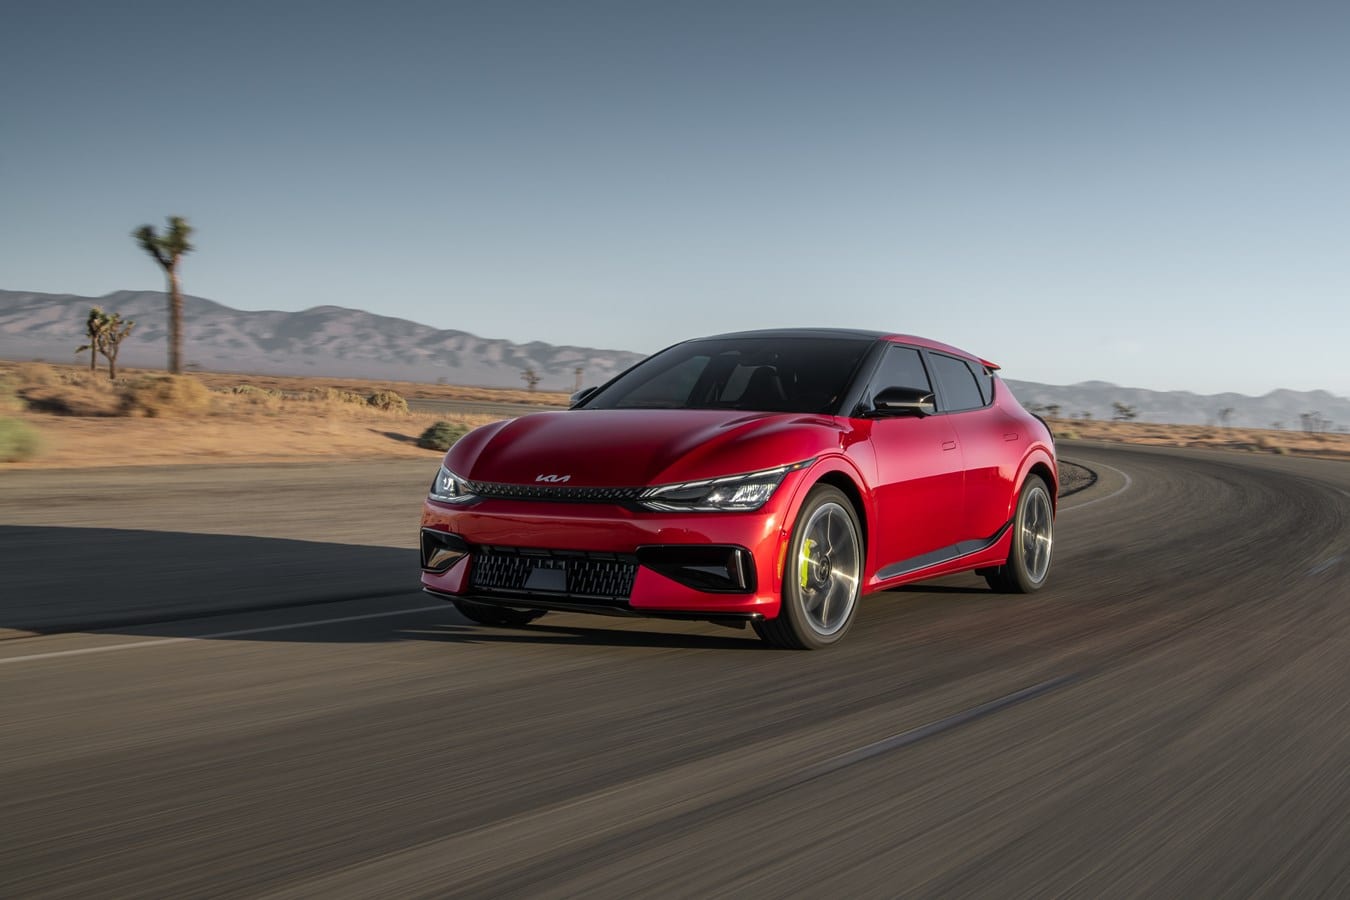 Kia America Unleashes Power of Silence in New Campaign for Most Powerful Kia Ever – the EV6 GT